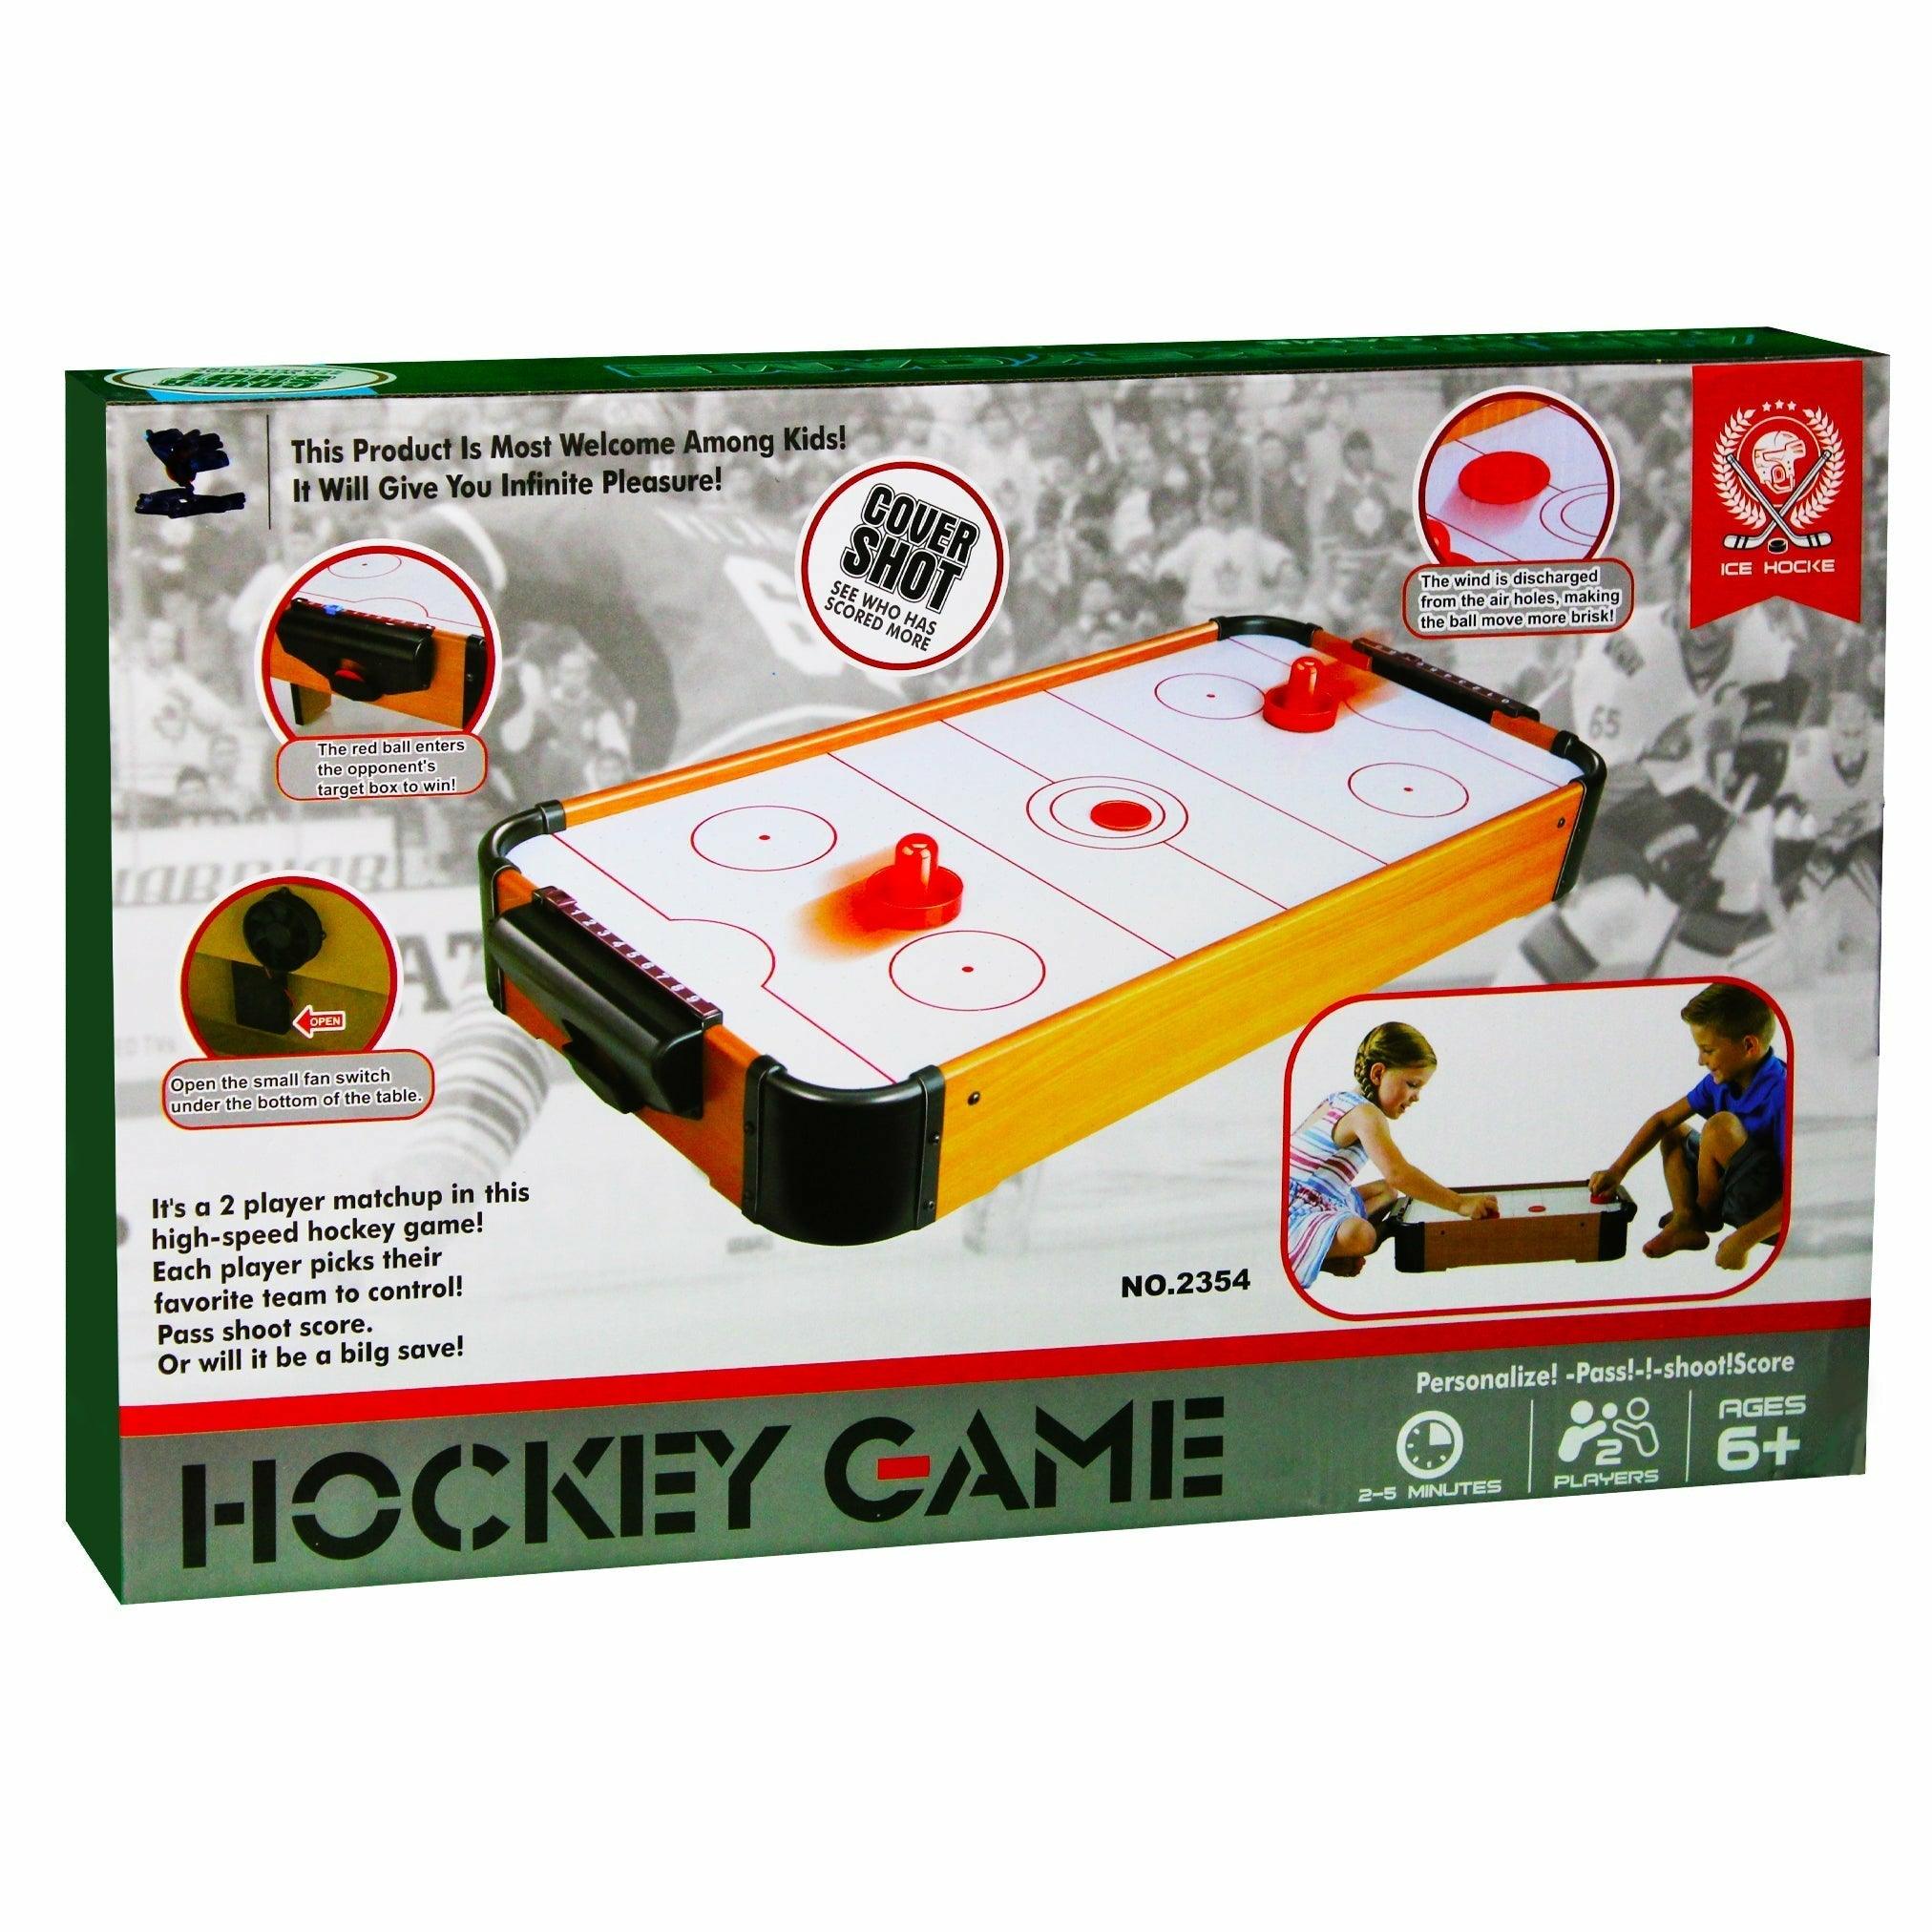 Air Hockey Game Cover Shot 2 Air Action Table Game Play Set - BumbleToys - 5-7 Years, Boys, Girls, Kids Sports & Balls, Toy House